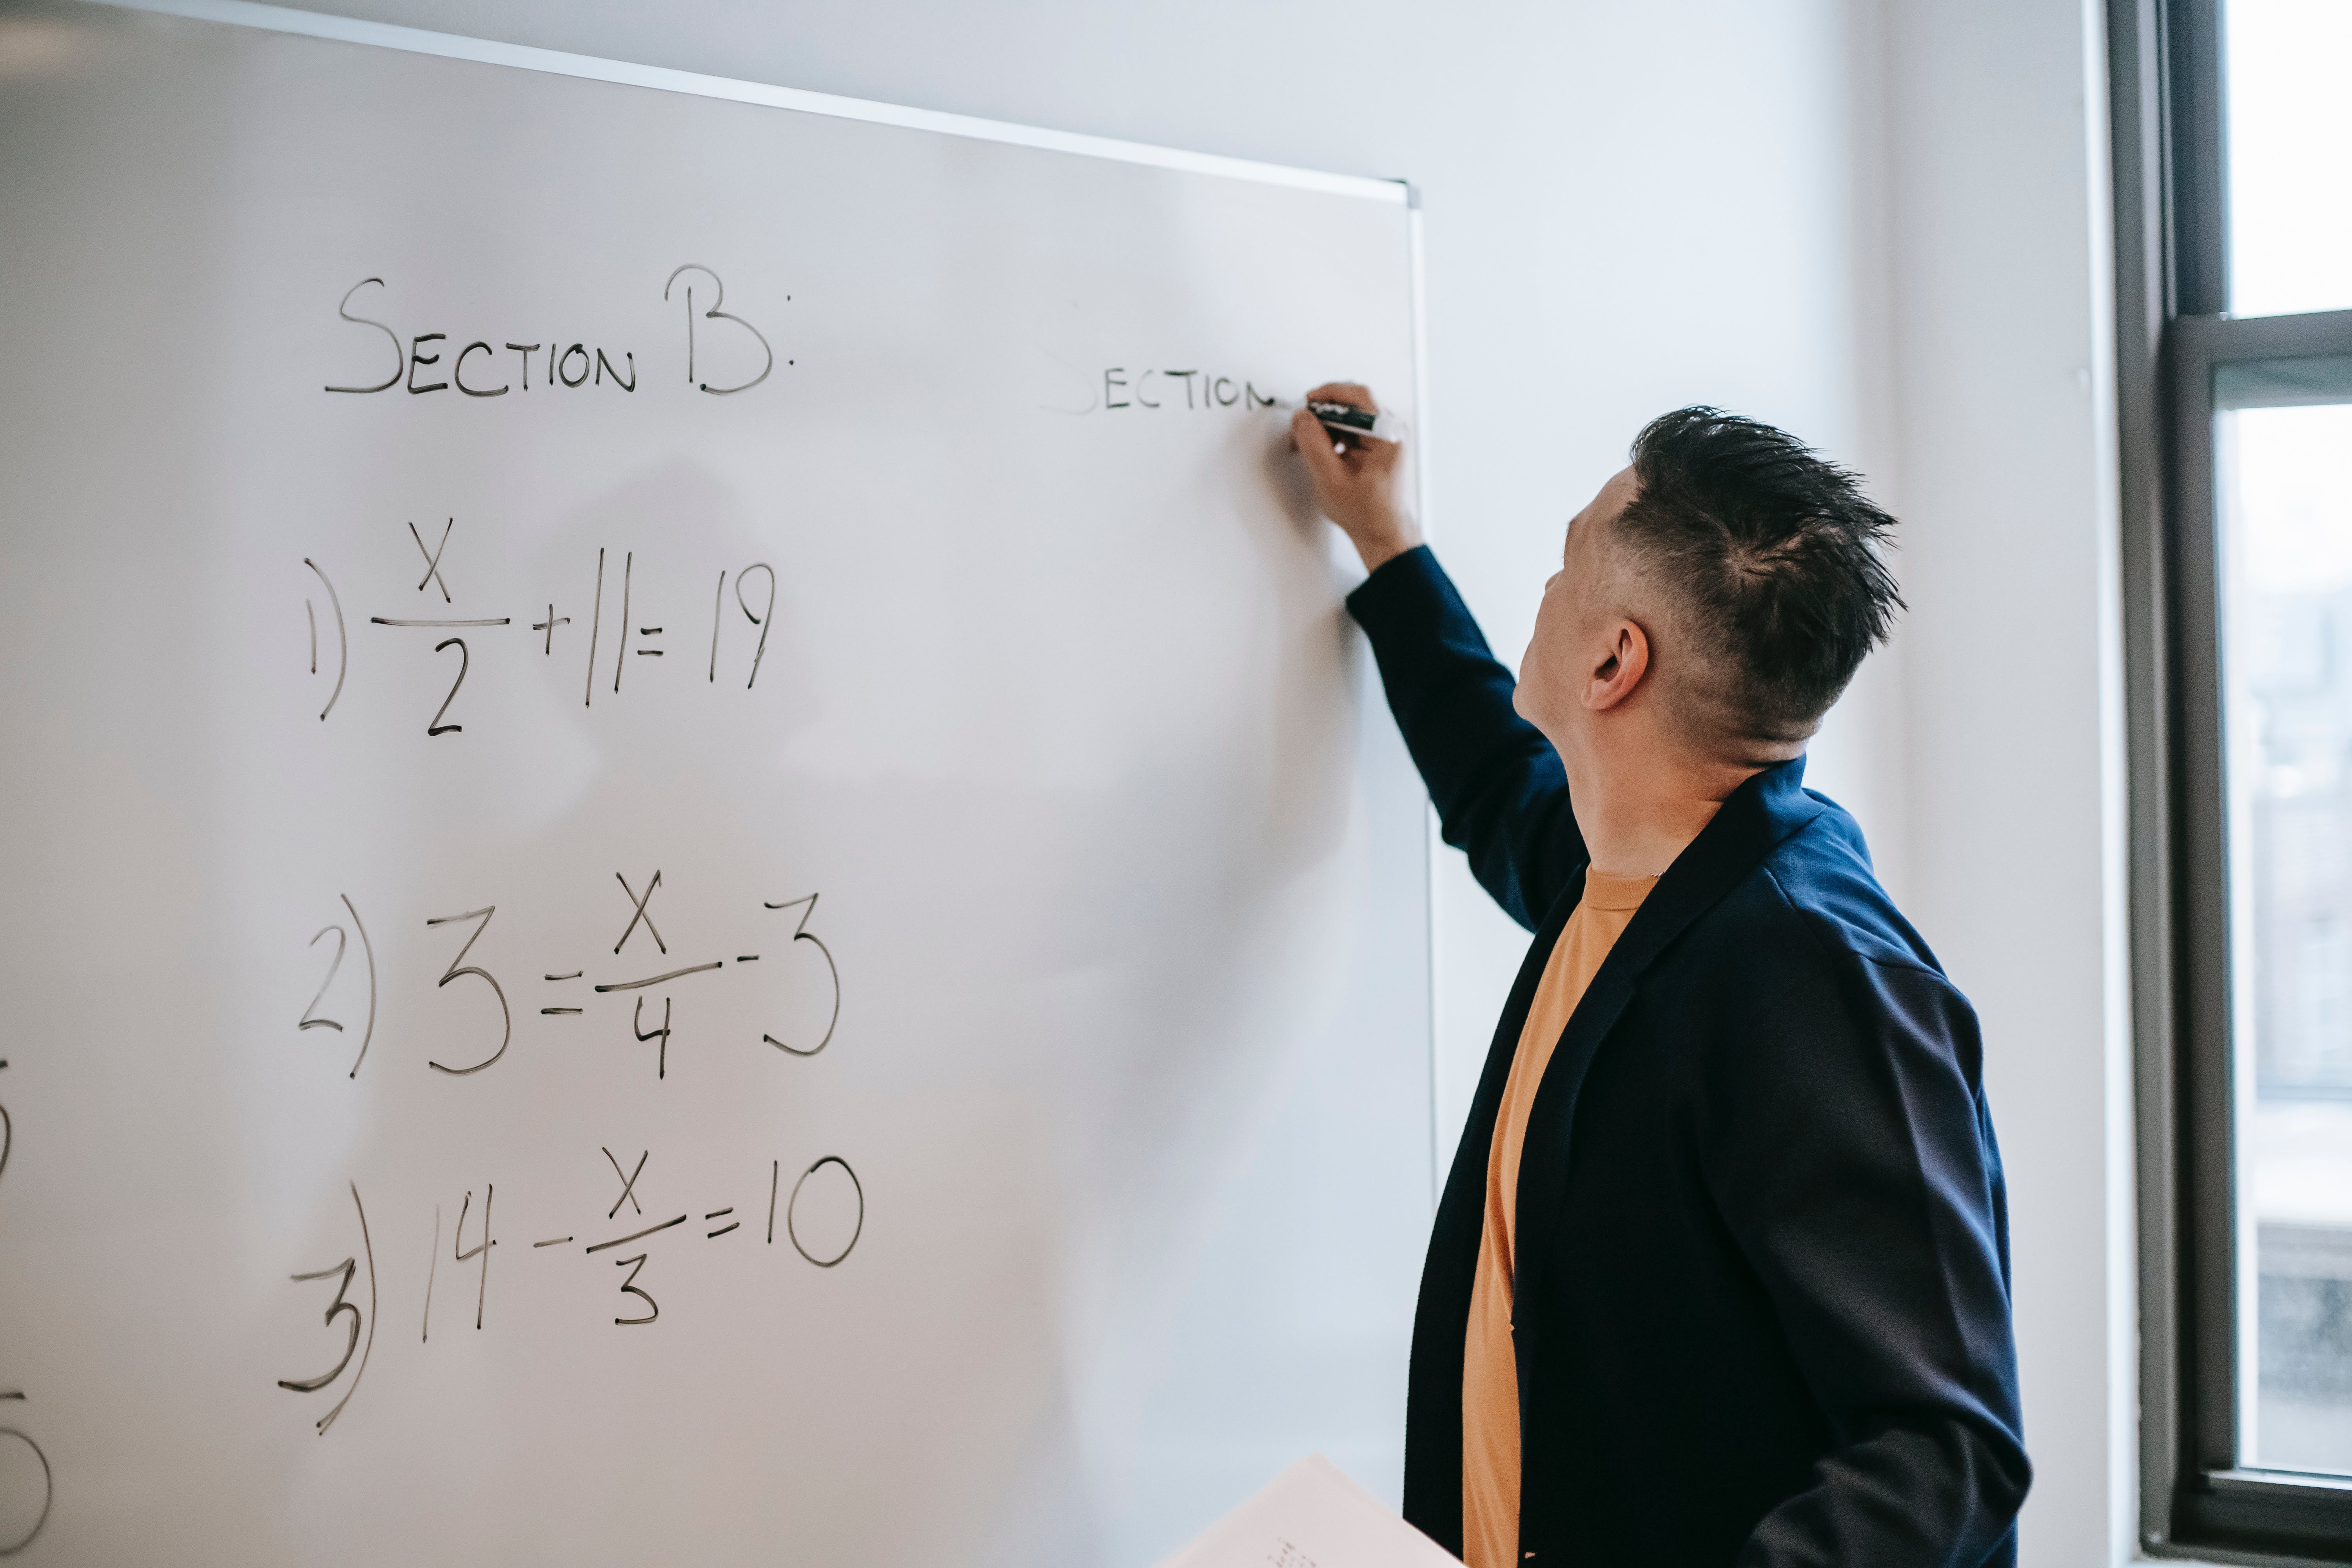 A man writing calculations on a whiteboard. | Source: Pexels